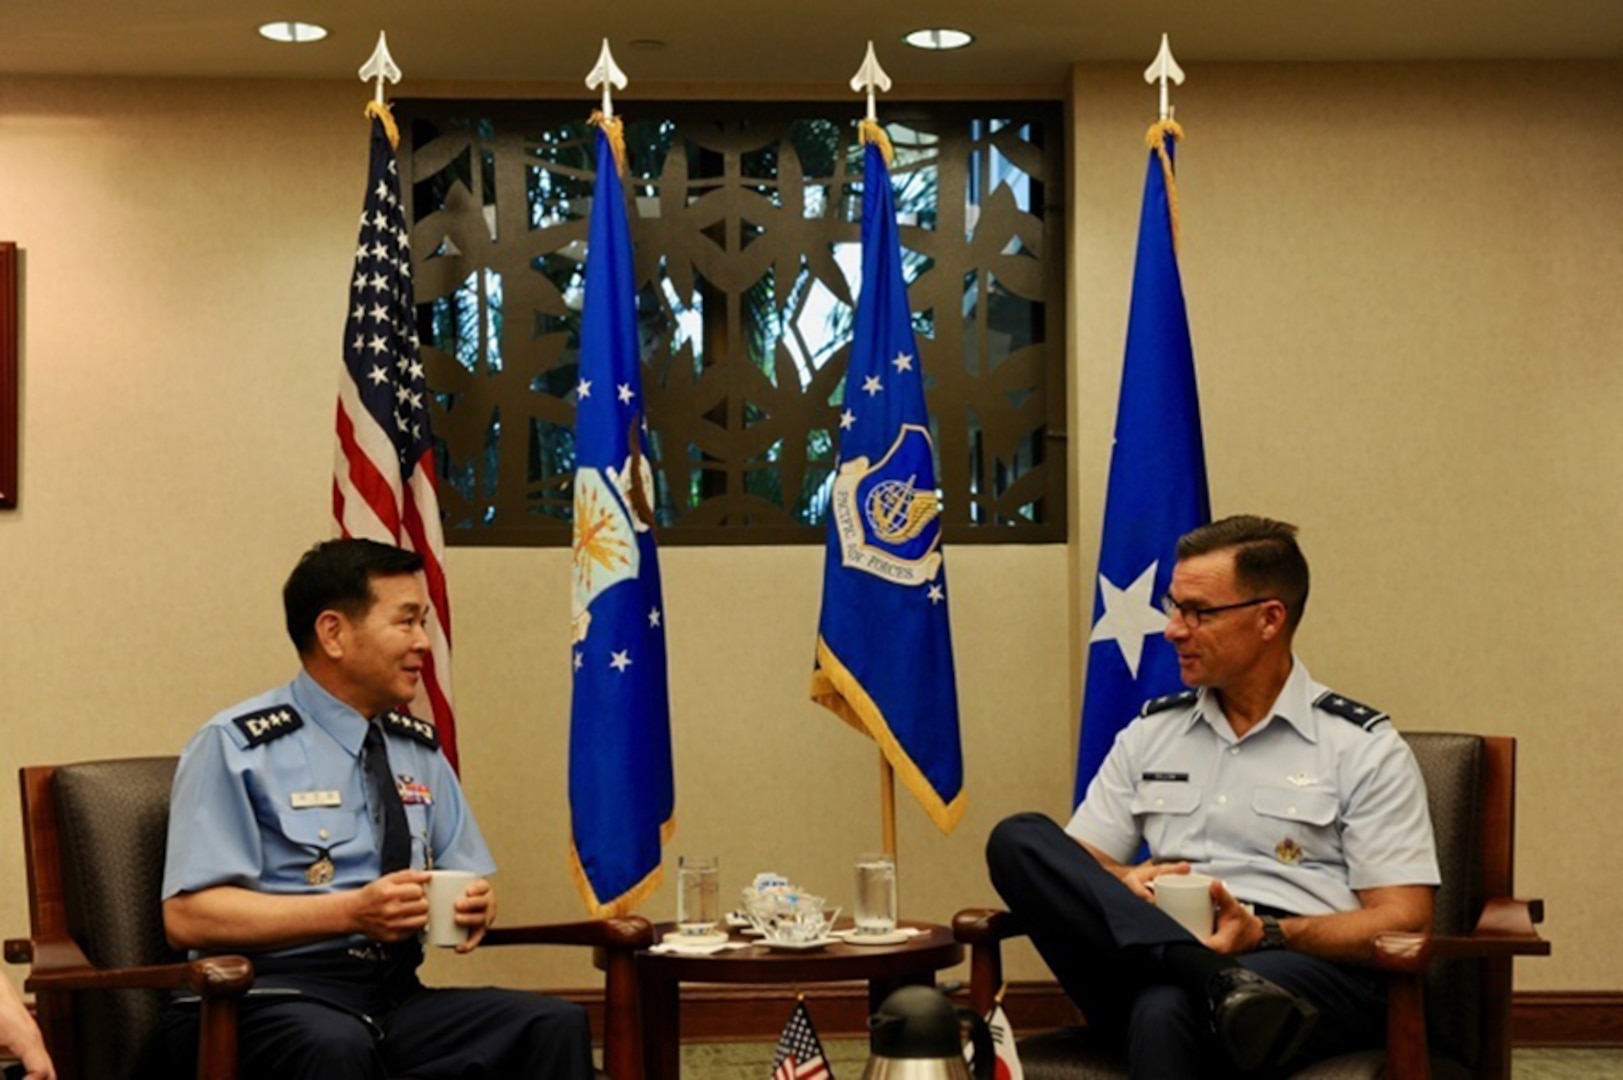 Republic of Korea Air Force (ROKAF) Lt. Gen. Keon Wan Lee (left), ROKAF Academy superintendent, talks with U.S. Air Force Maj. Gen. Mark C. Dillon, Pacific Air Forces vice commander, during the recent PACAF-hosted ROKAF Academy cadet visit to Joint Base Pearl Harbor-Hickam, Hawaii, Oct. 19, 2016.  This marks the third visit by ROKAFA cadets who after commissioning, will likely work alongside U.S. forces on the Korean peninsula.  The visit is an opportunity for PACAF to show the cadets how PACAF and U.S. Pacific Command operate and gain a better understanding of the region and the importance of regional security.  